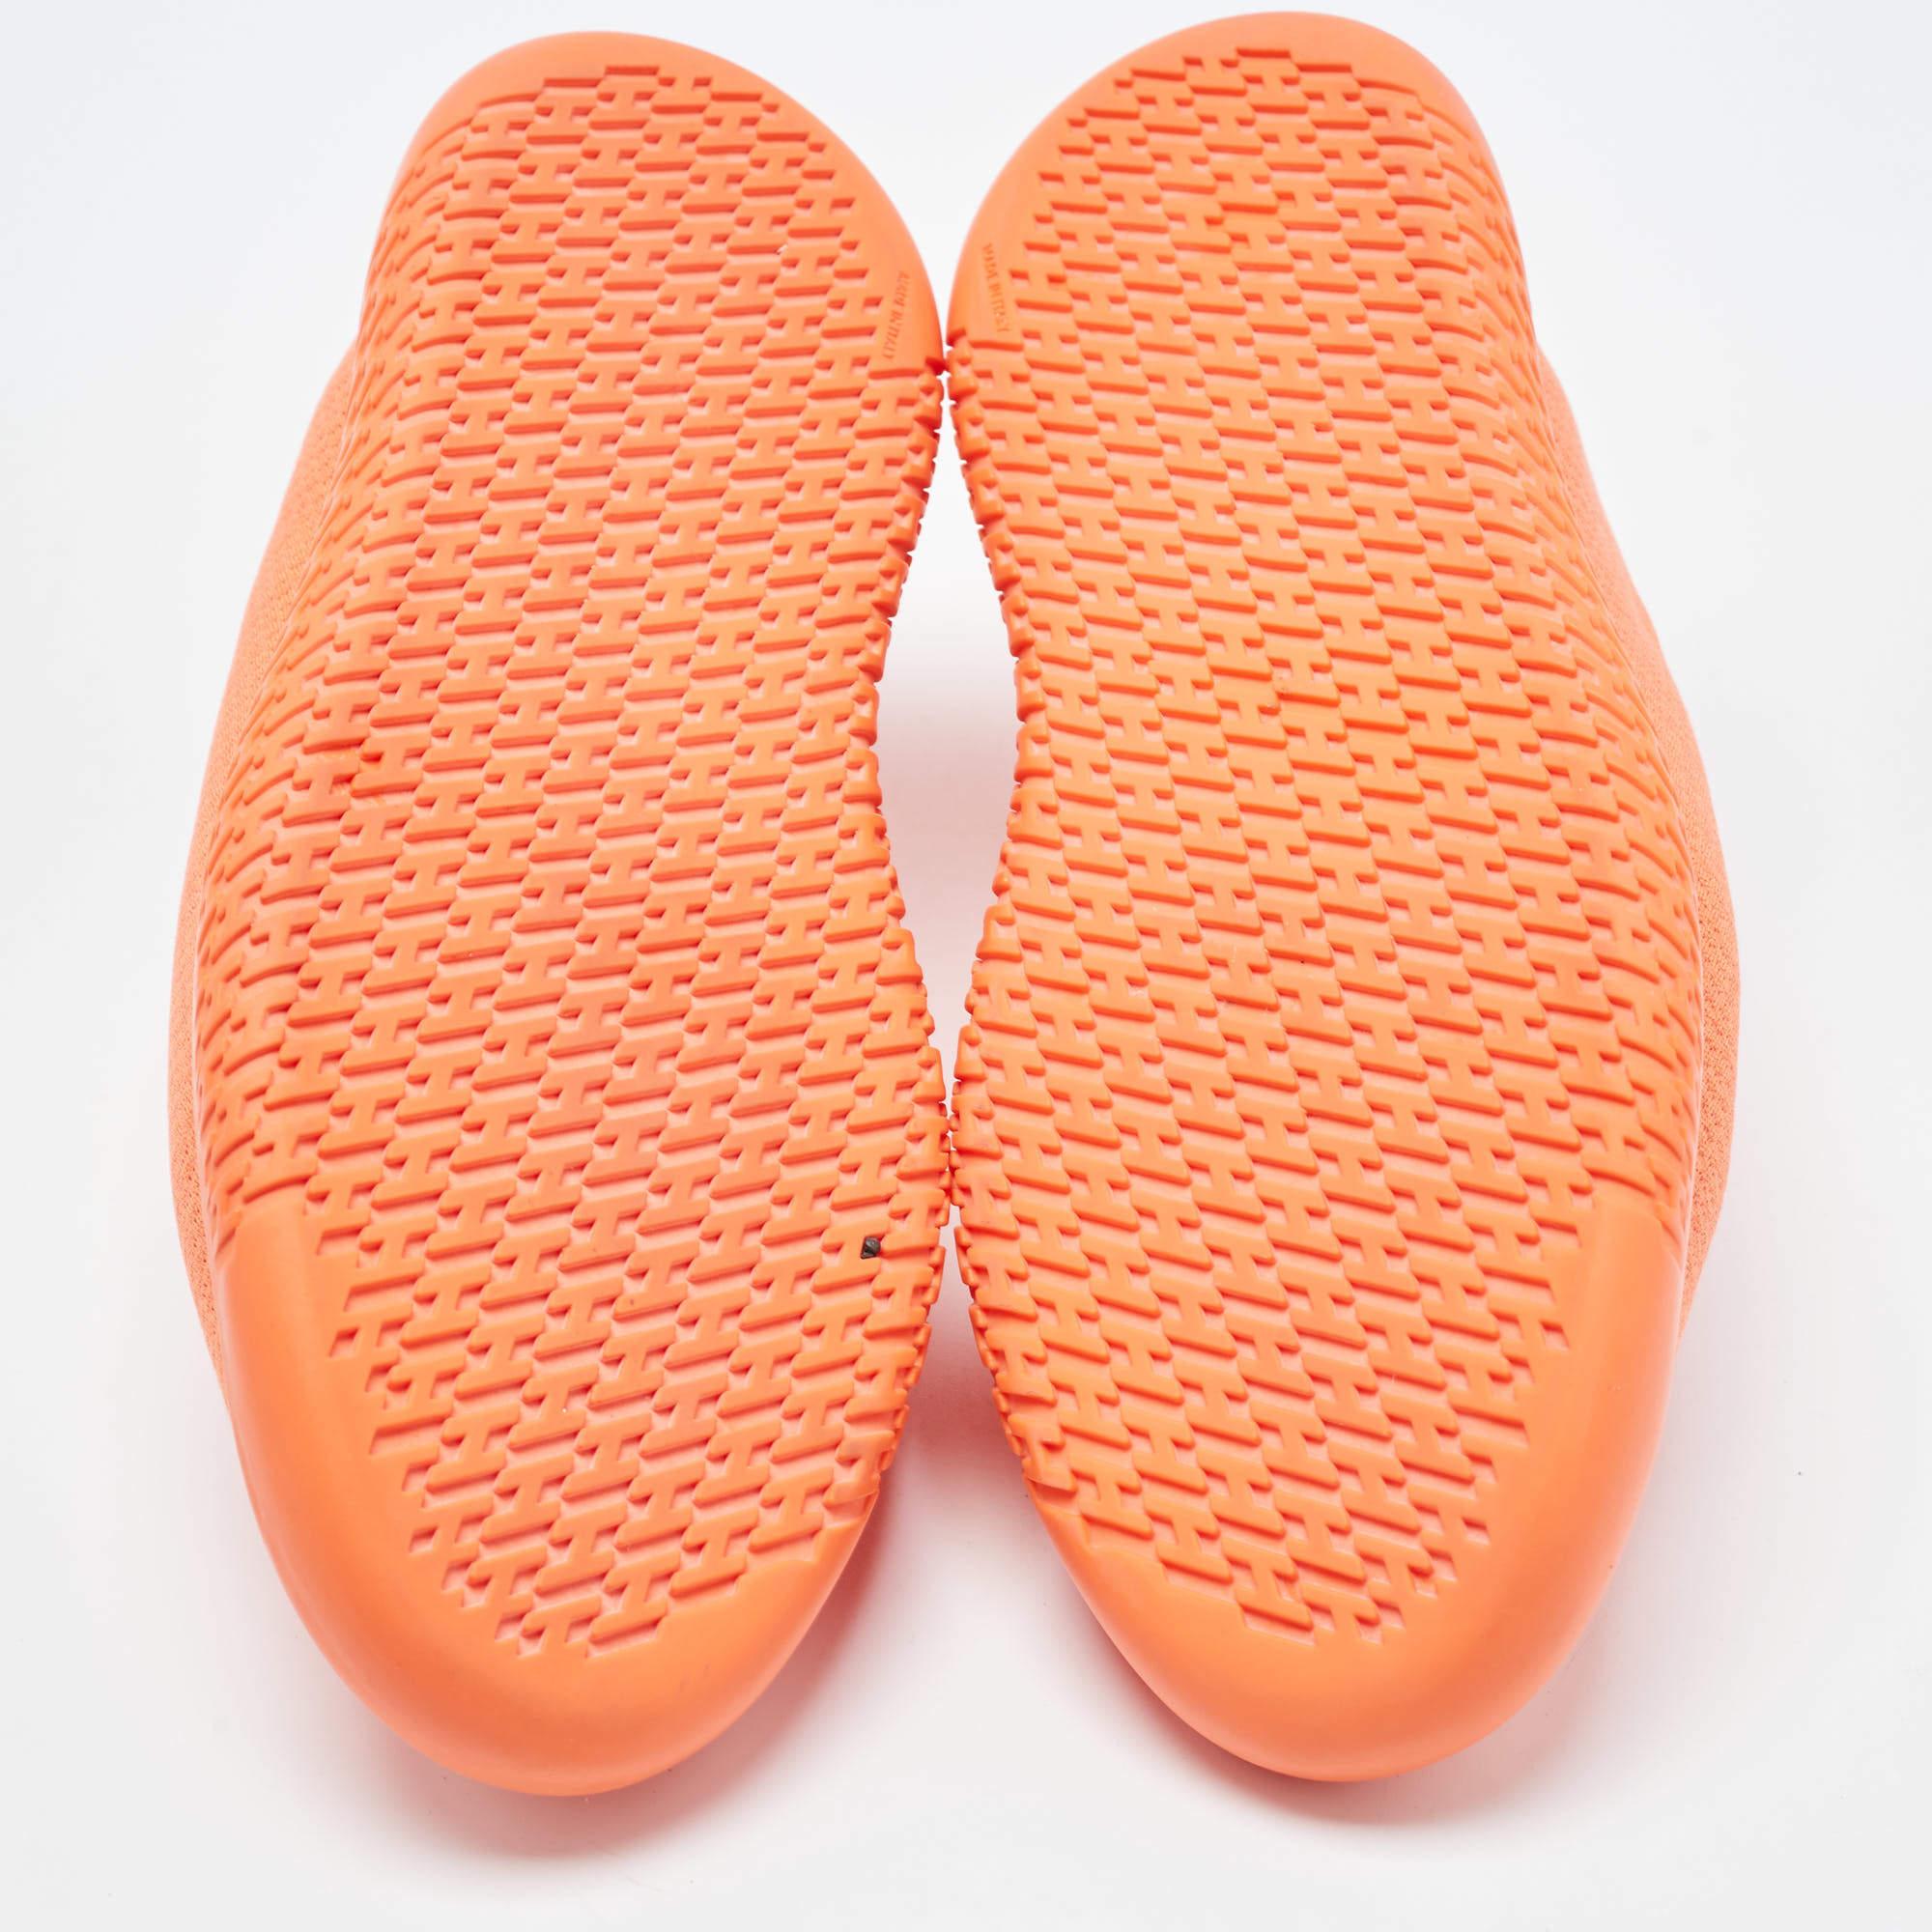 Hermès Orange Leather and Neoprene Low Top Sneakers Size 36 3